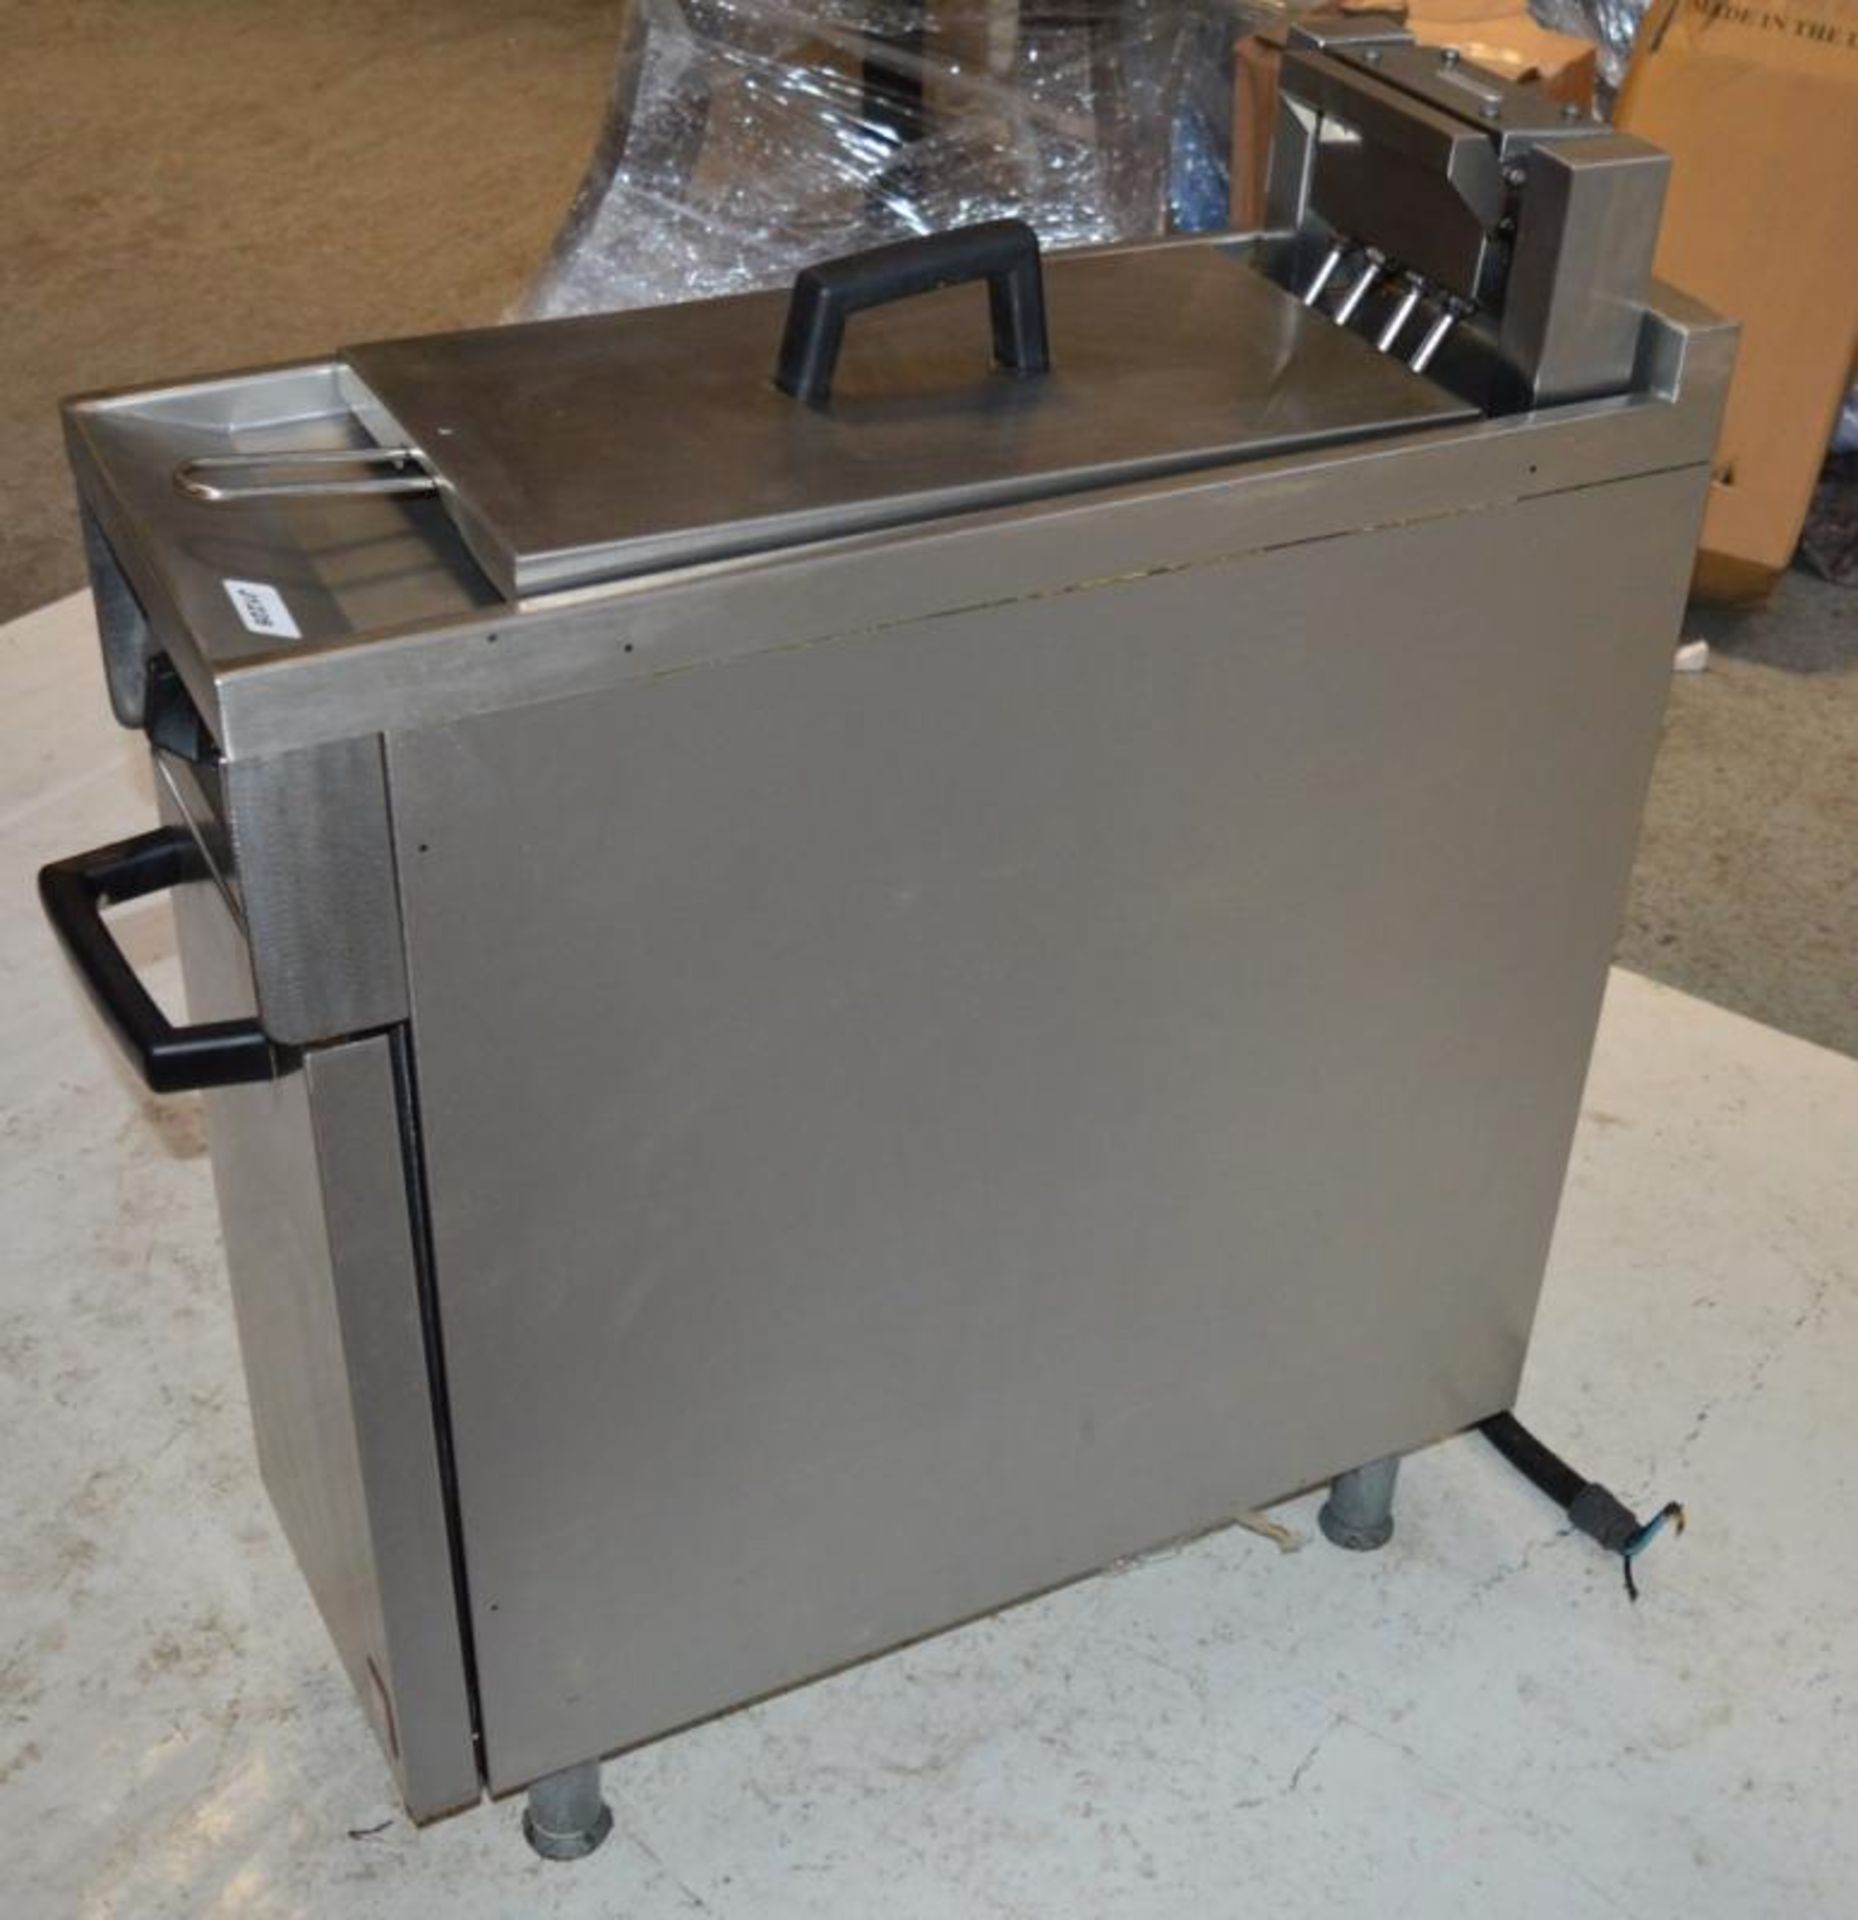 1 x Falcon Dominator E1830 Electric 3 Phase Fryer Cooker - Stainless Steel - H84 x W30 x D77 cms - C - Image 9 of 13